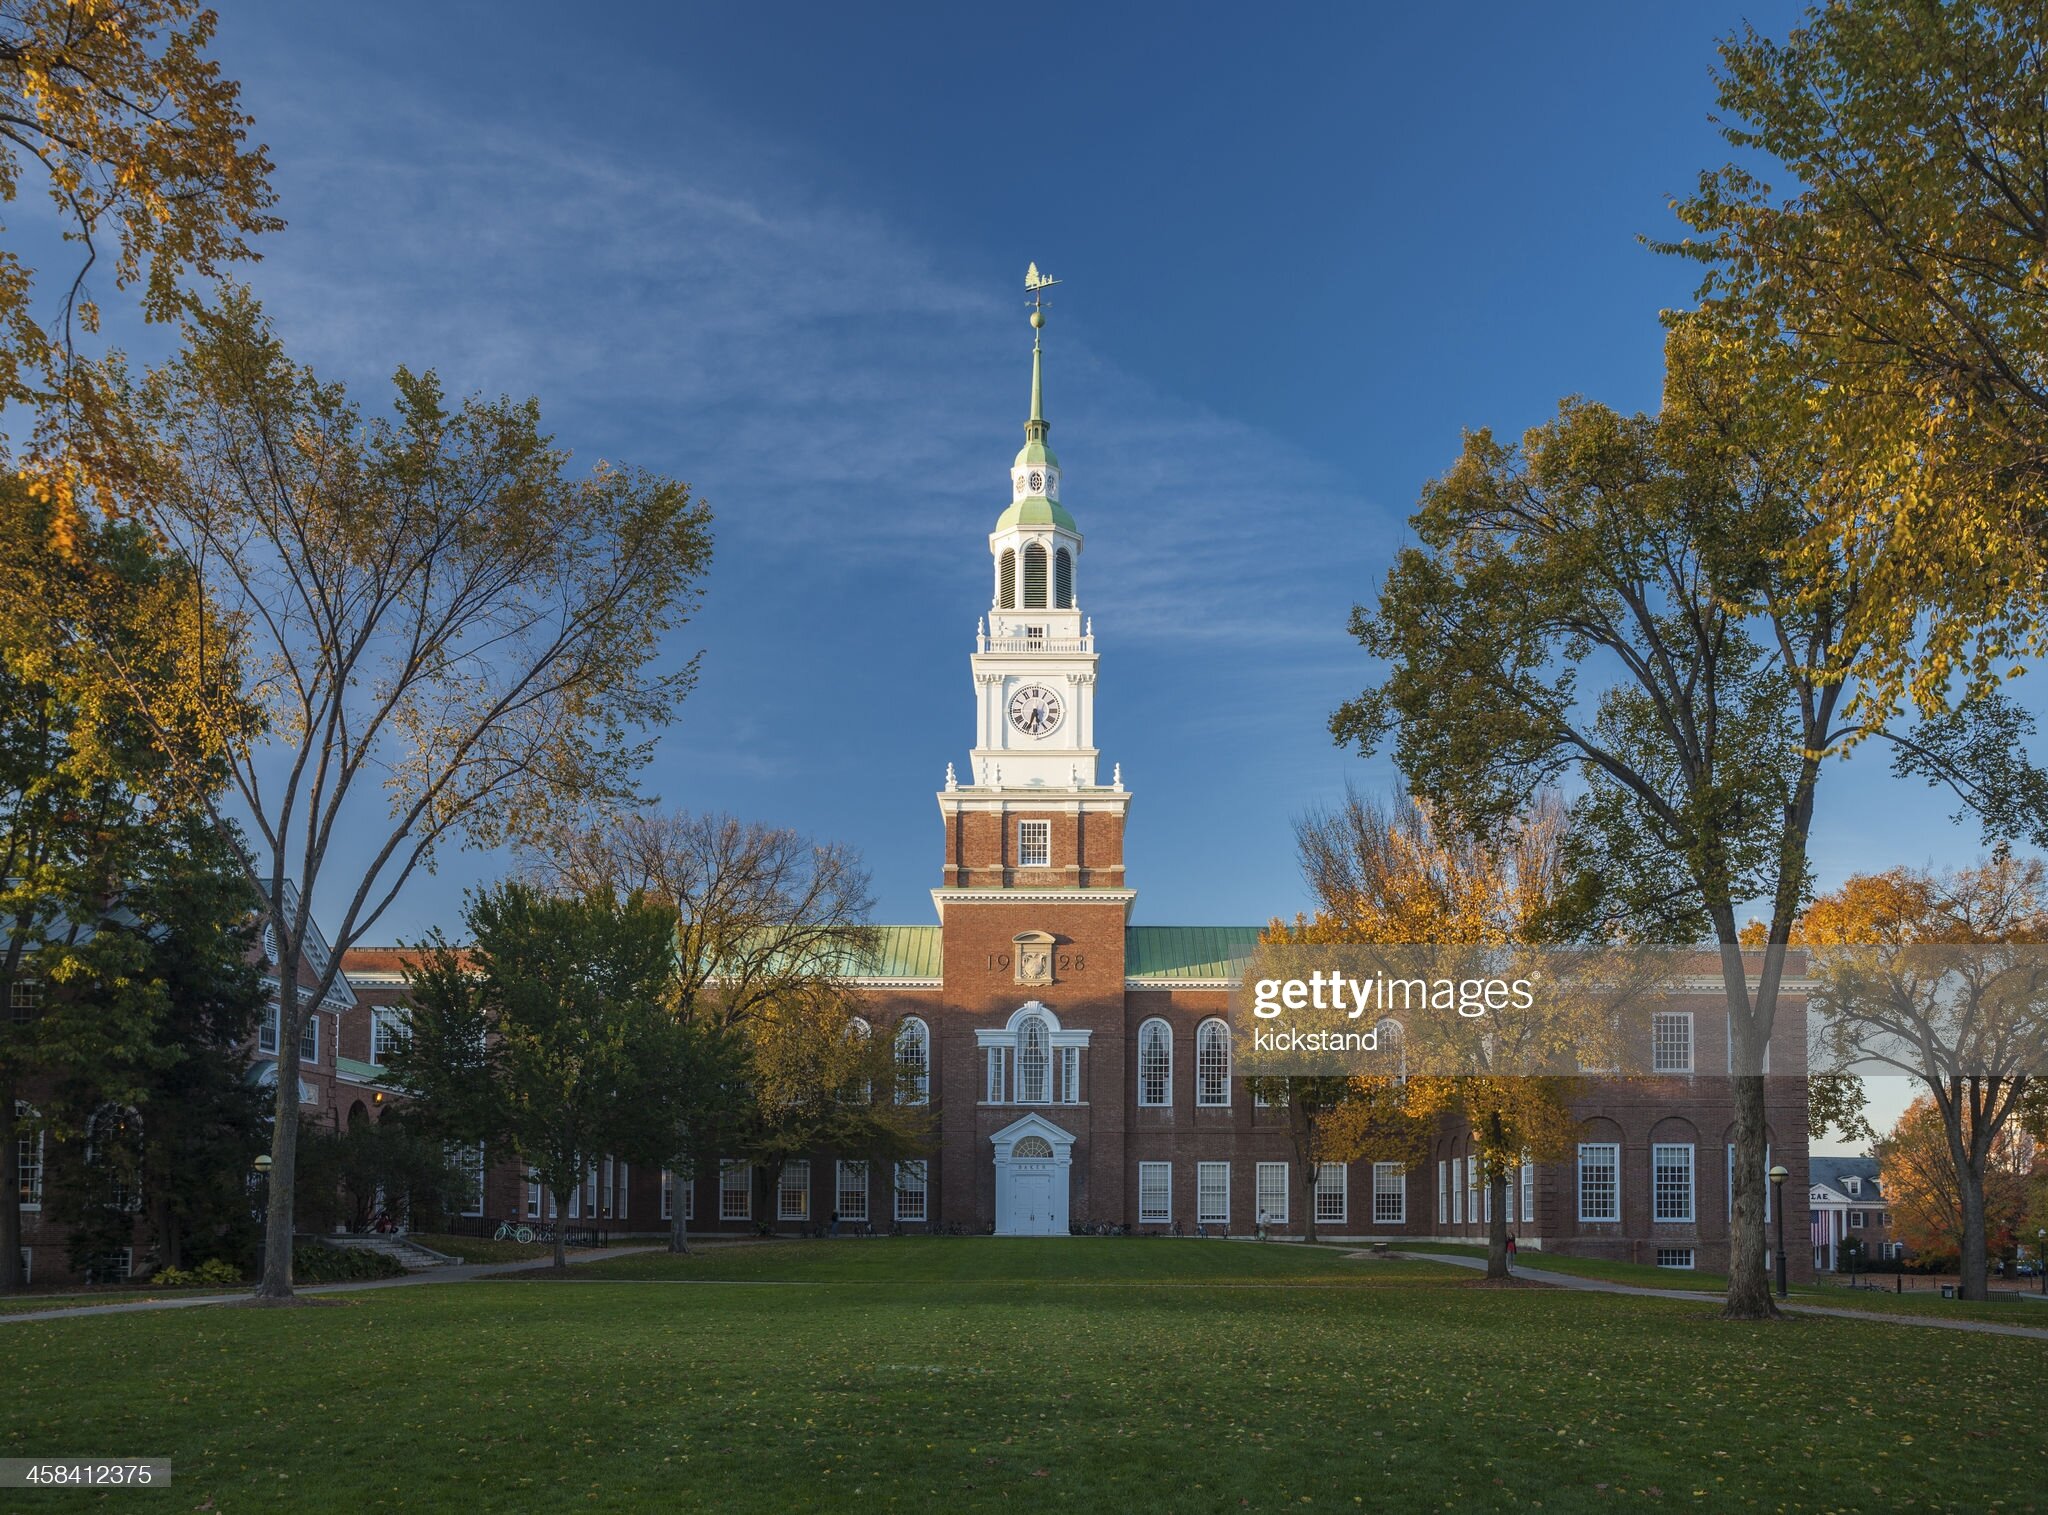 Picture of Dartmouth College’s campus taken by kickstand - Getty Images